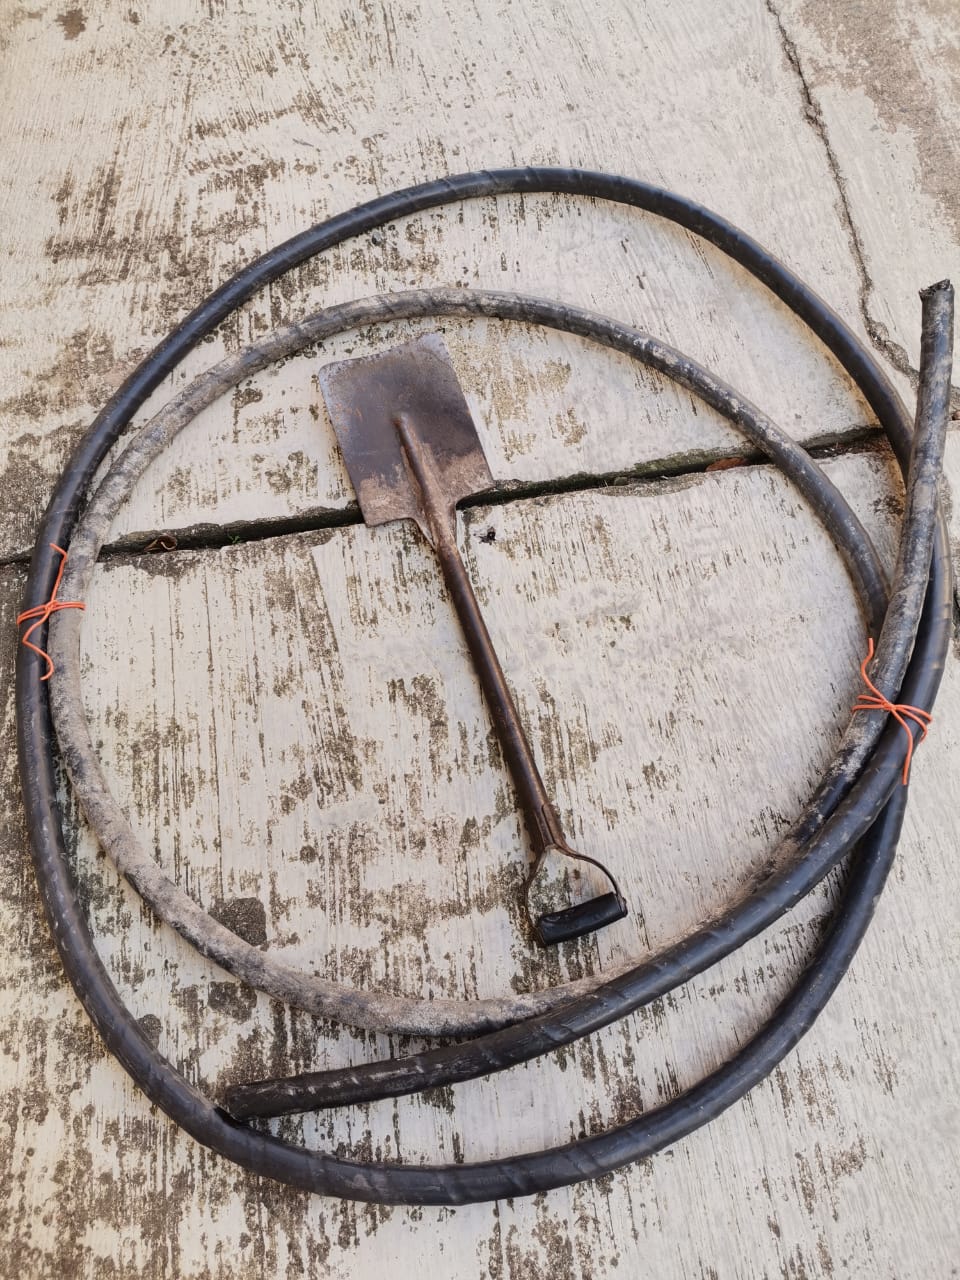 A 37-year-old suspect was found in possession of spade and stolen copper cables - KwaZulu-Natal